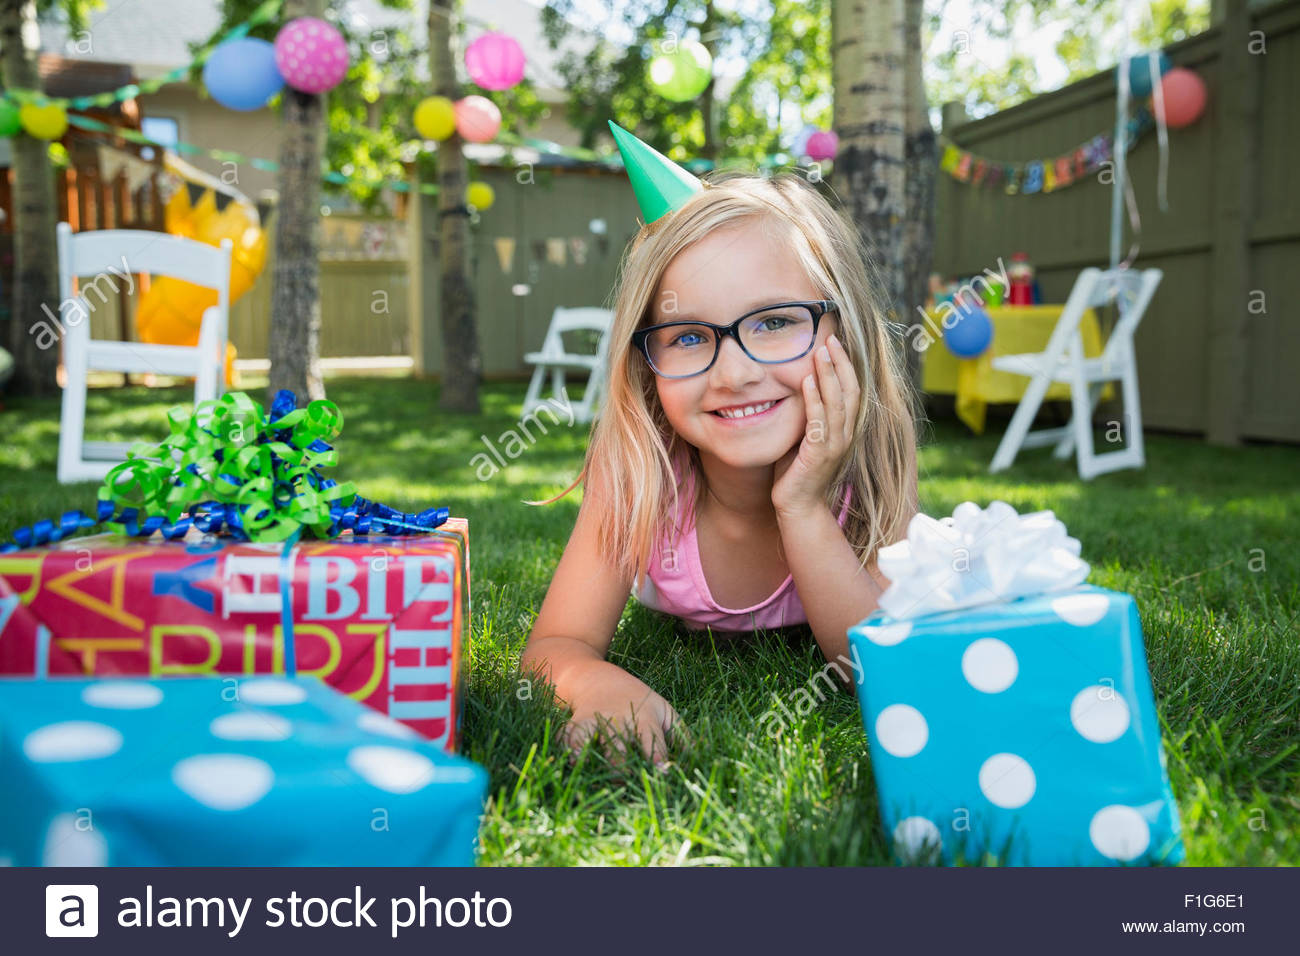 Portrait smiling girl birthday party hat gifts grass Stock Photo